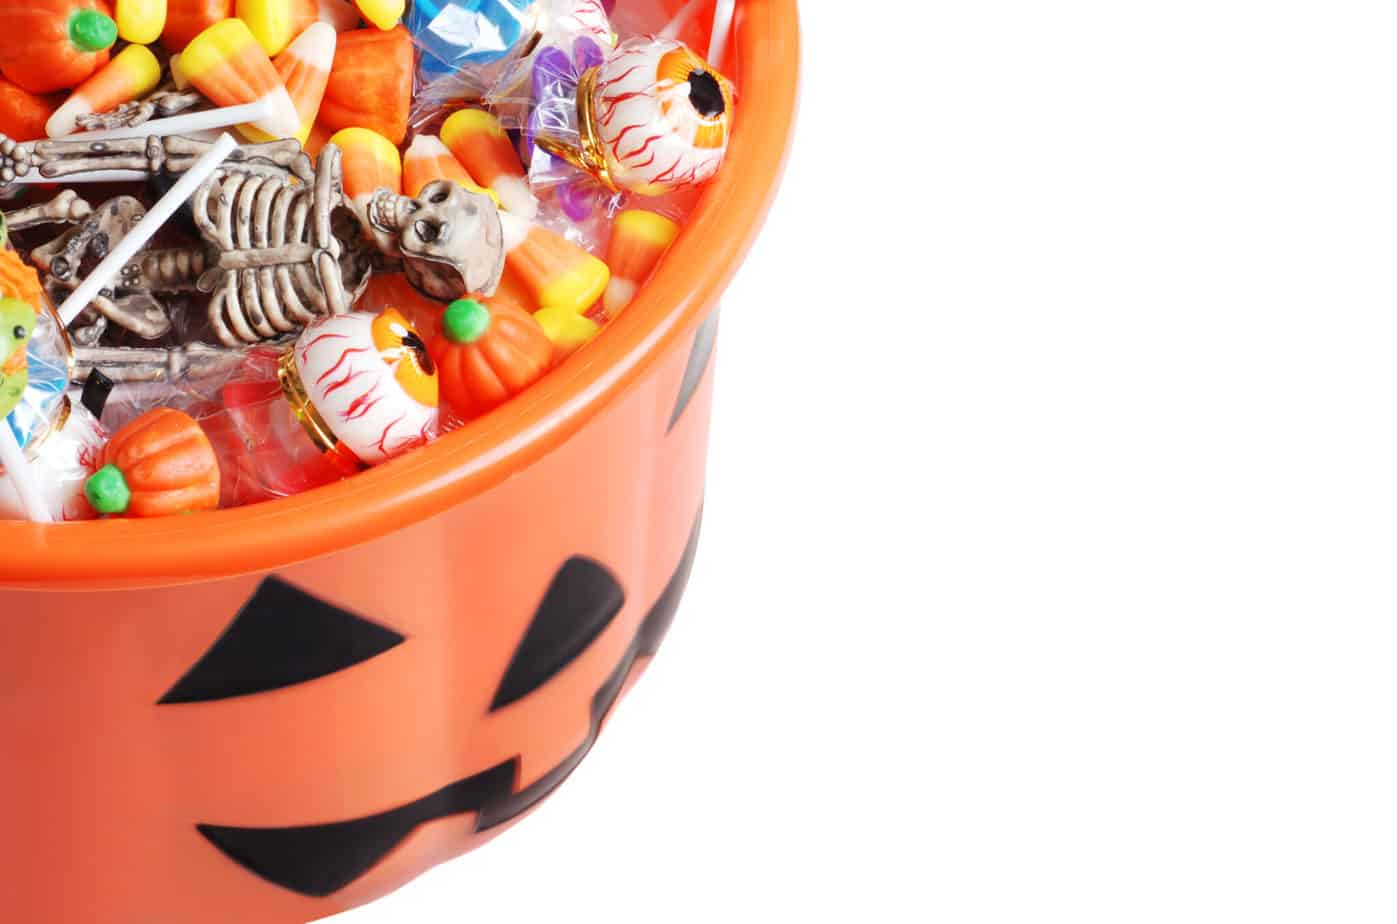 Fun things to do with your leftover Halloween candy; from freezing and baking it into sweet treats, to turning it into crafts, games and science experiments. 